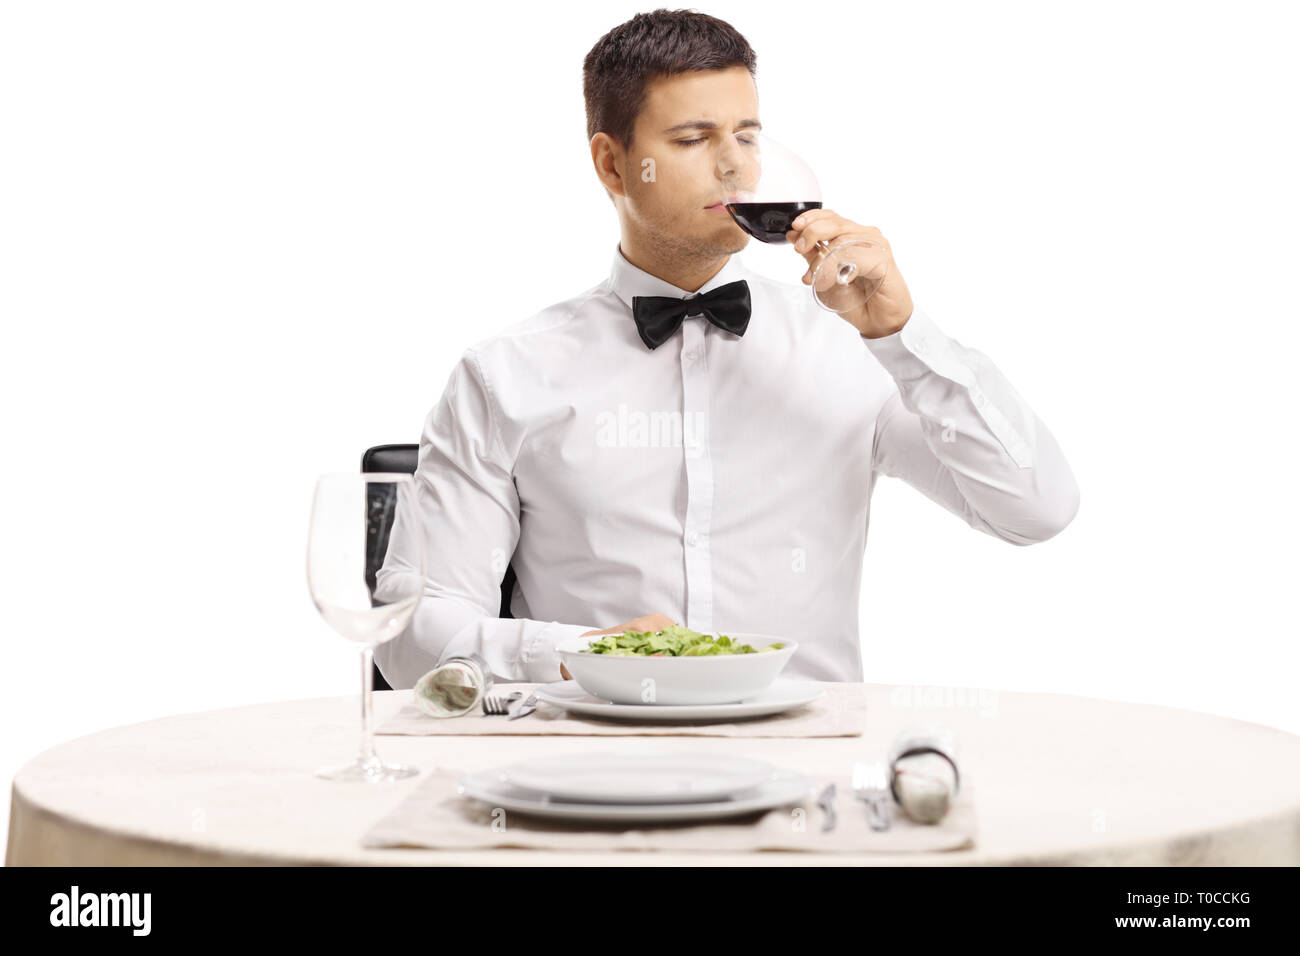 Portrait of a young handsome man with a bow tie tasting red wine at a restaurant table isolated on white background Stock Photo